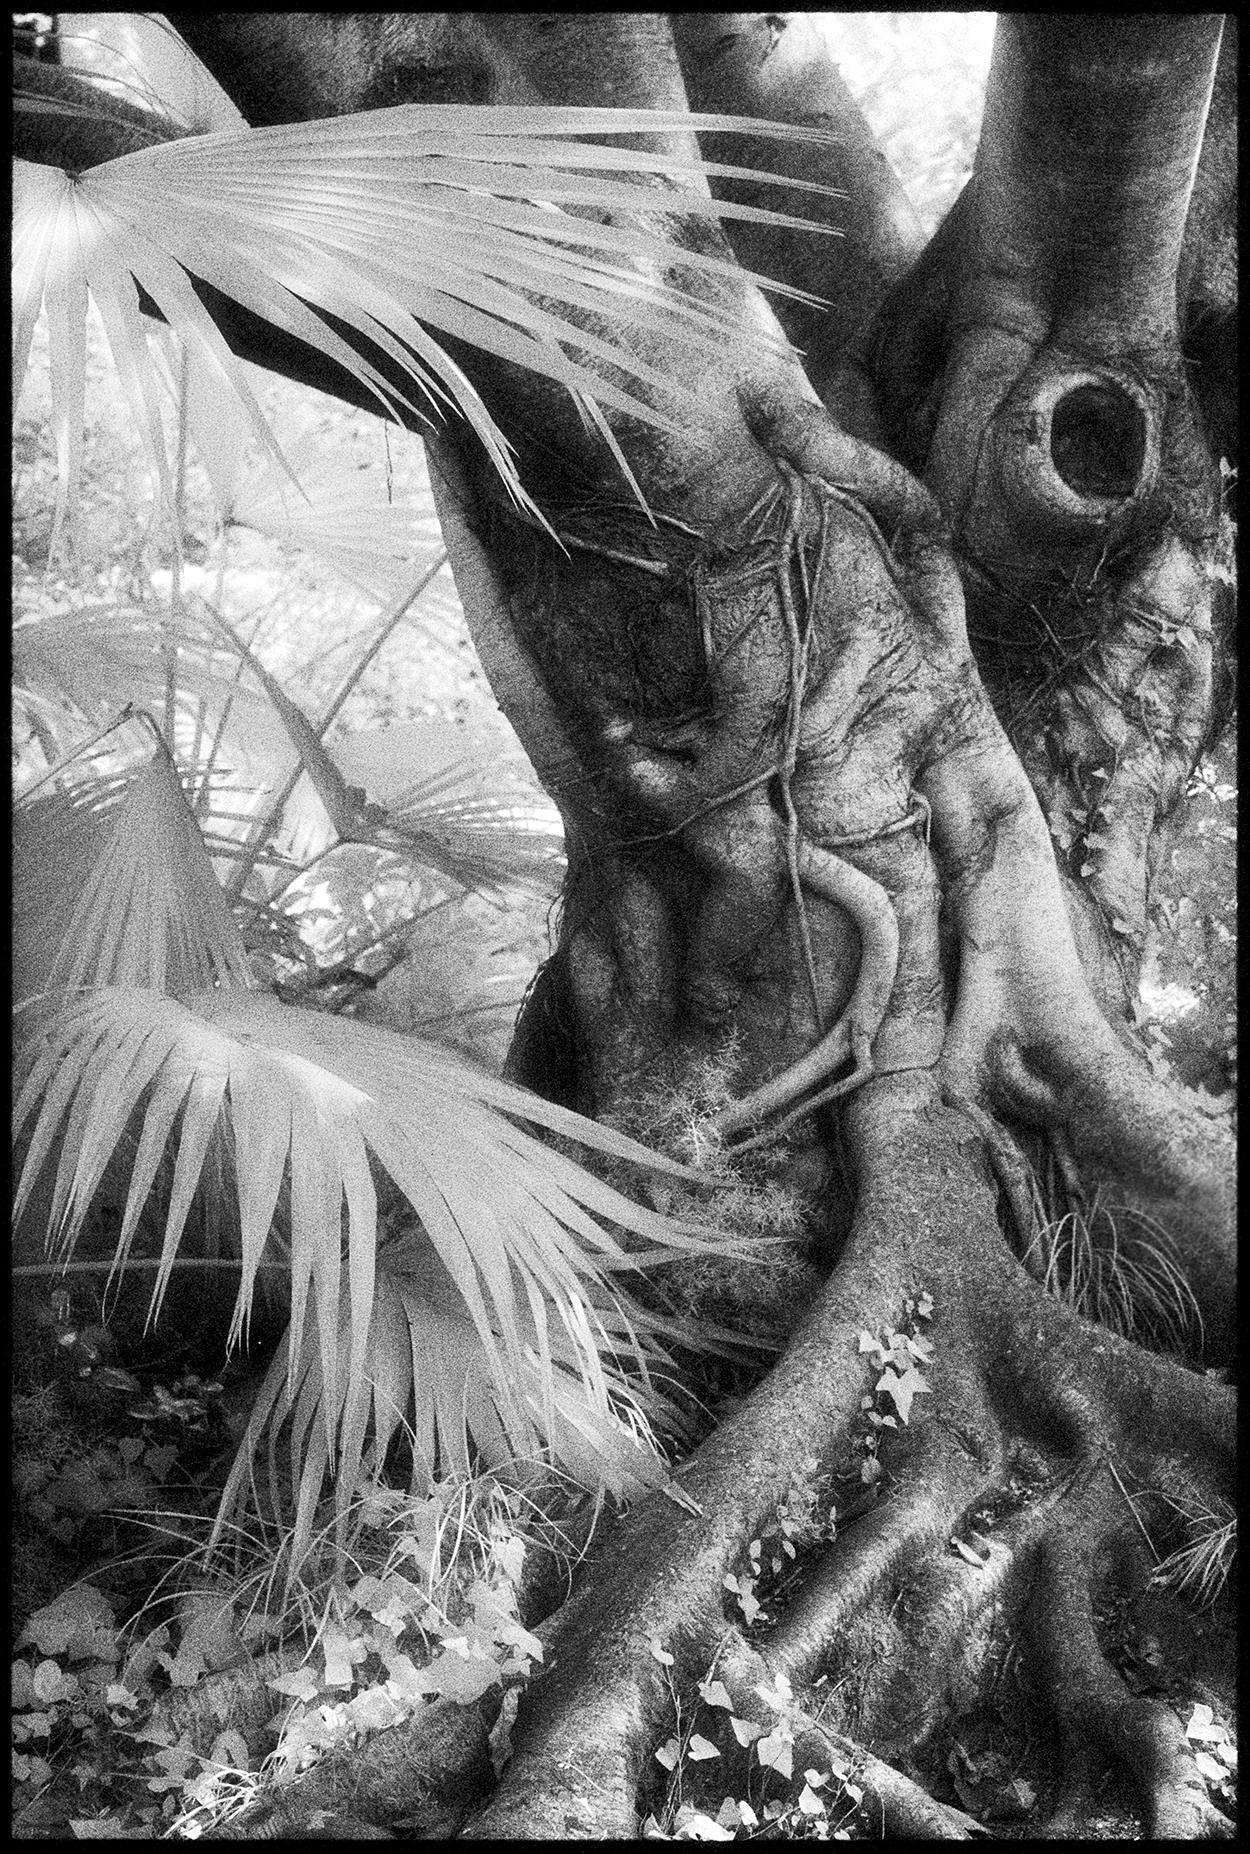 Edward Alfano Black and White Photograph - Chengdu, China - Black & White Photograph of Banyan Tree Landscape with Palms